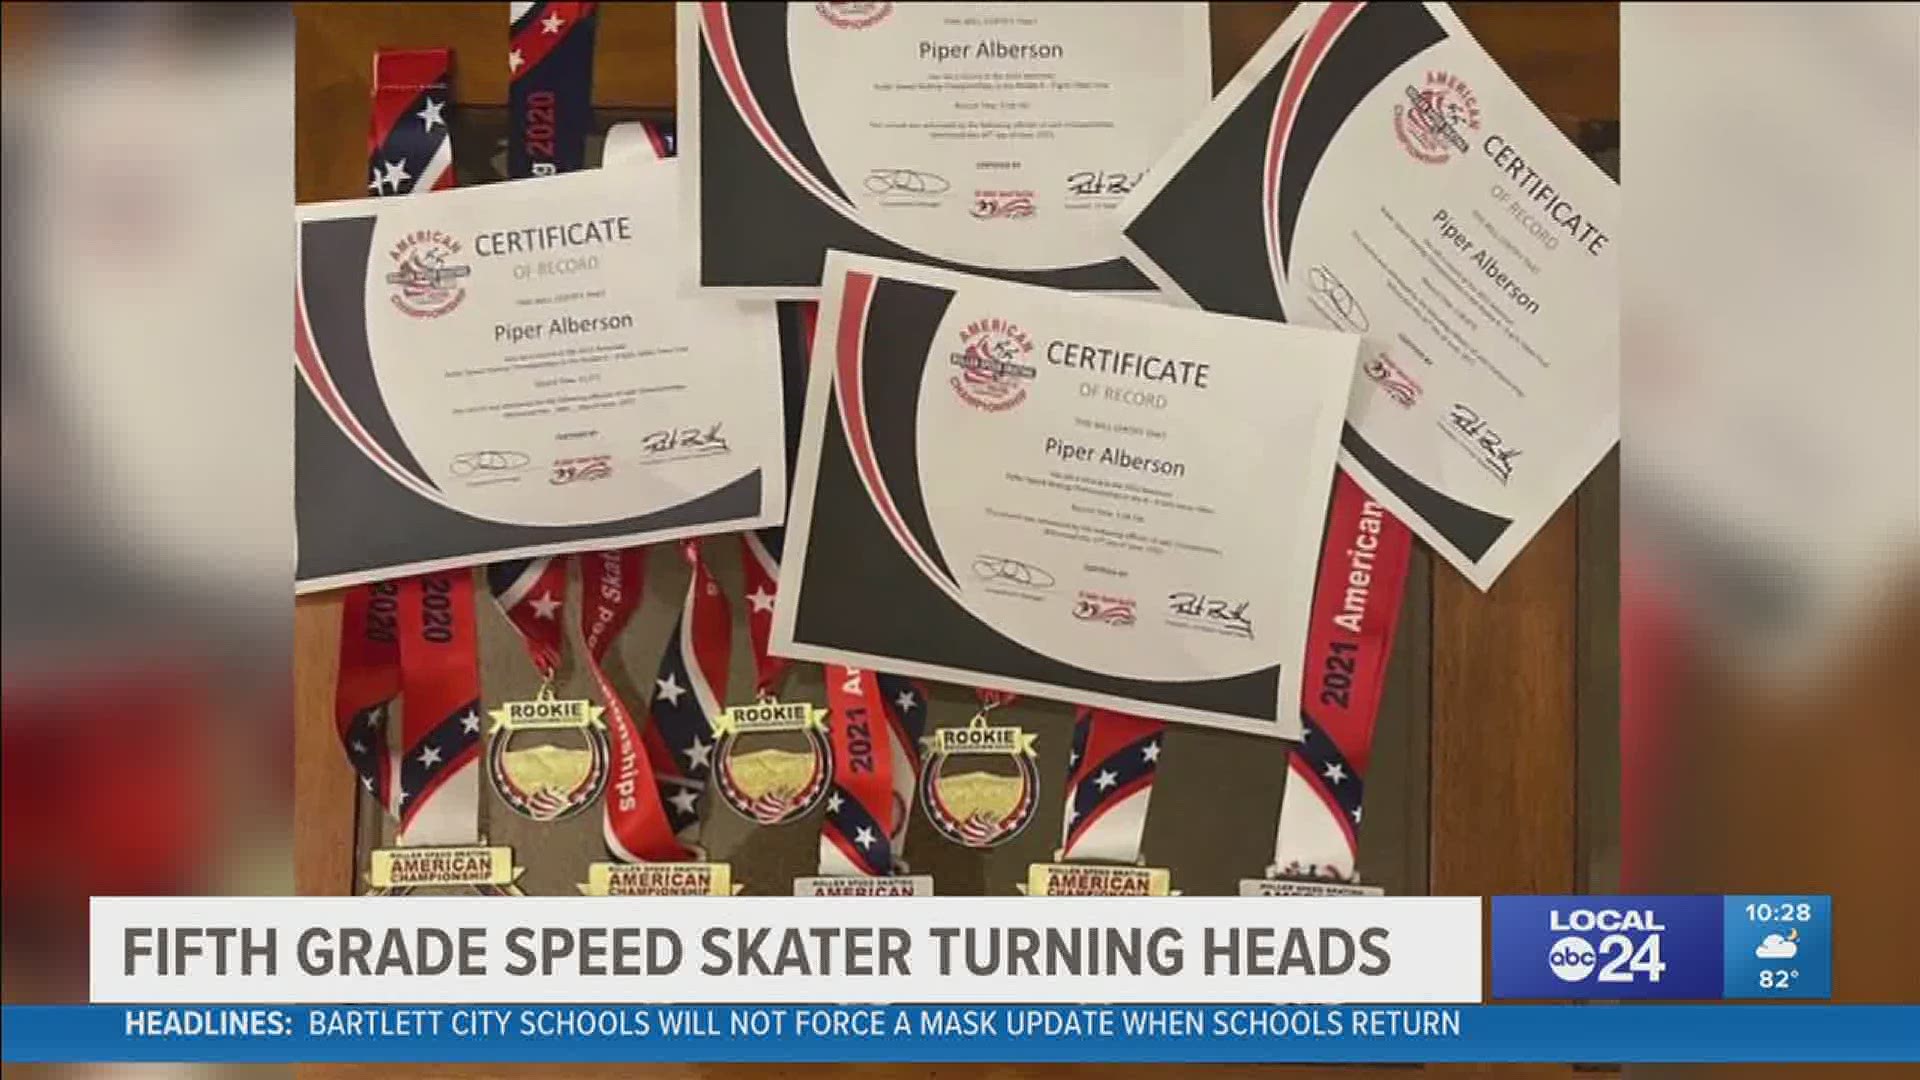 Piper Alberson is only in the fifth grade and already being recognized nationally after emerging as a gold and silver medalist in her rookie speed skating season.